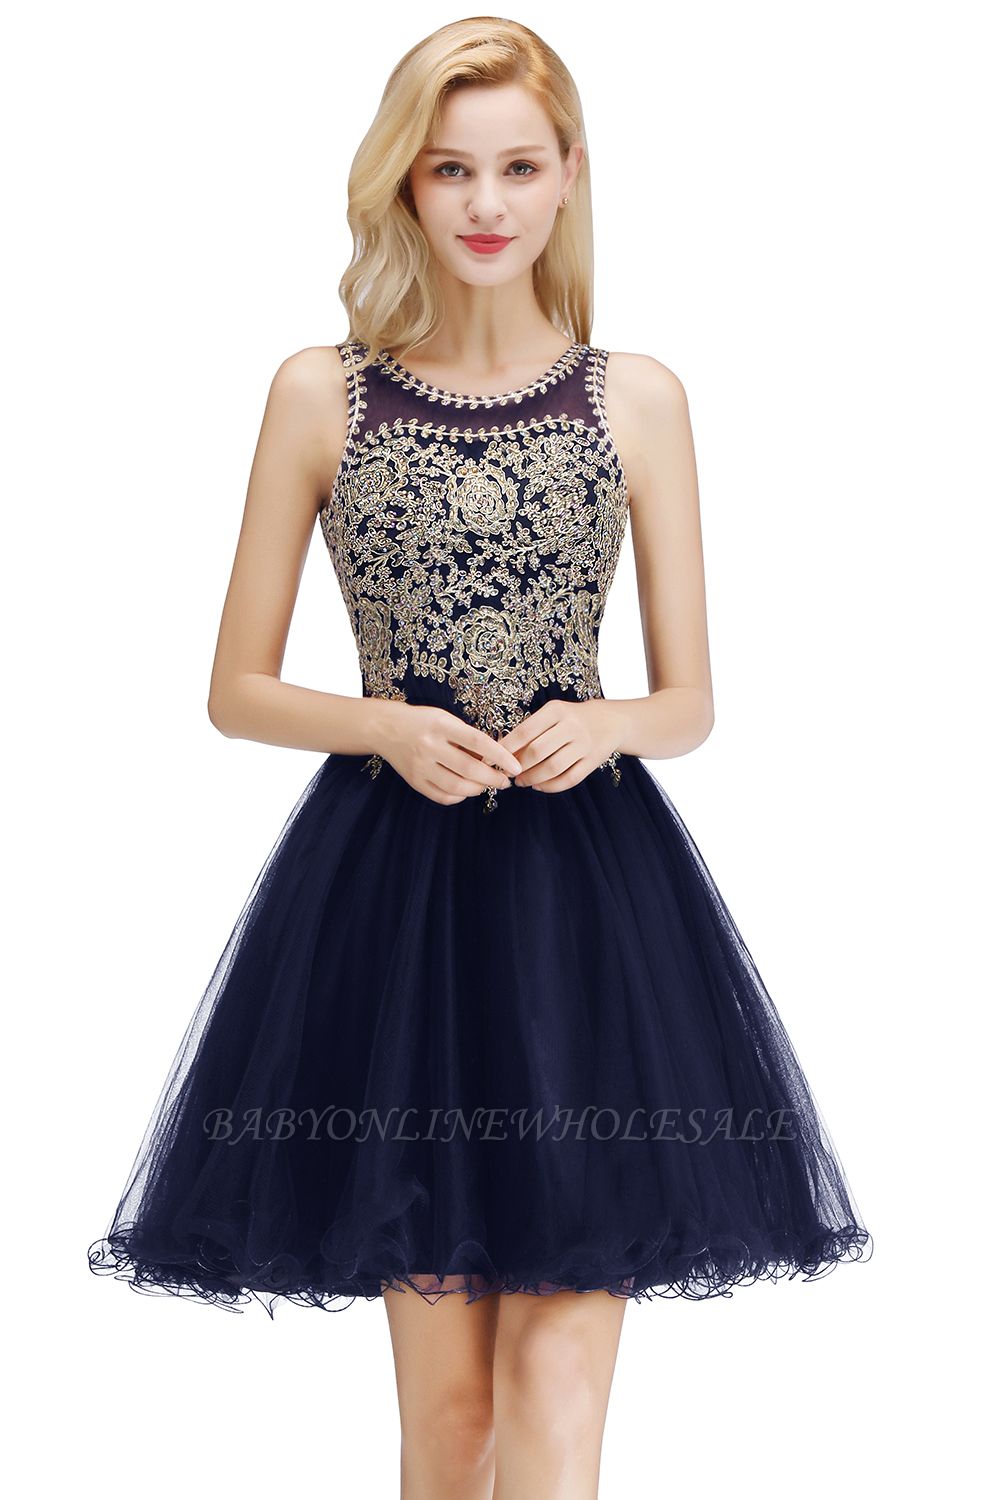 Cute Crew Neck Puffy Homecoming Dresses with Lace Appliques | Beaded Sleeveless Open back Black Teens Dress for Cocktail